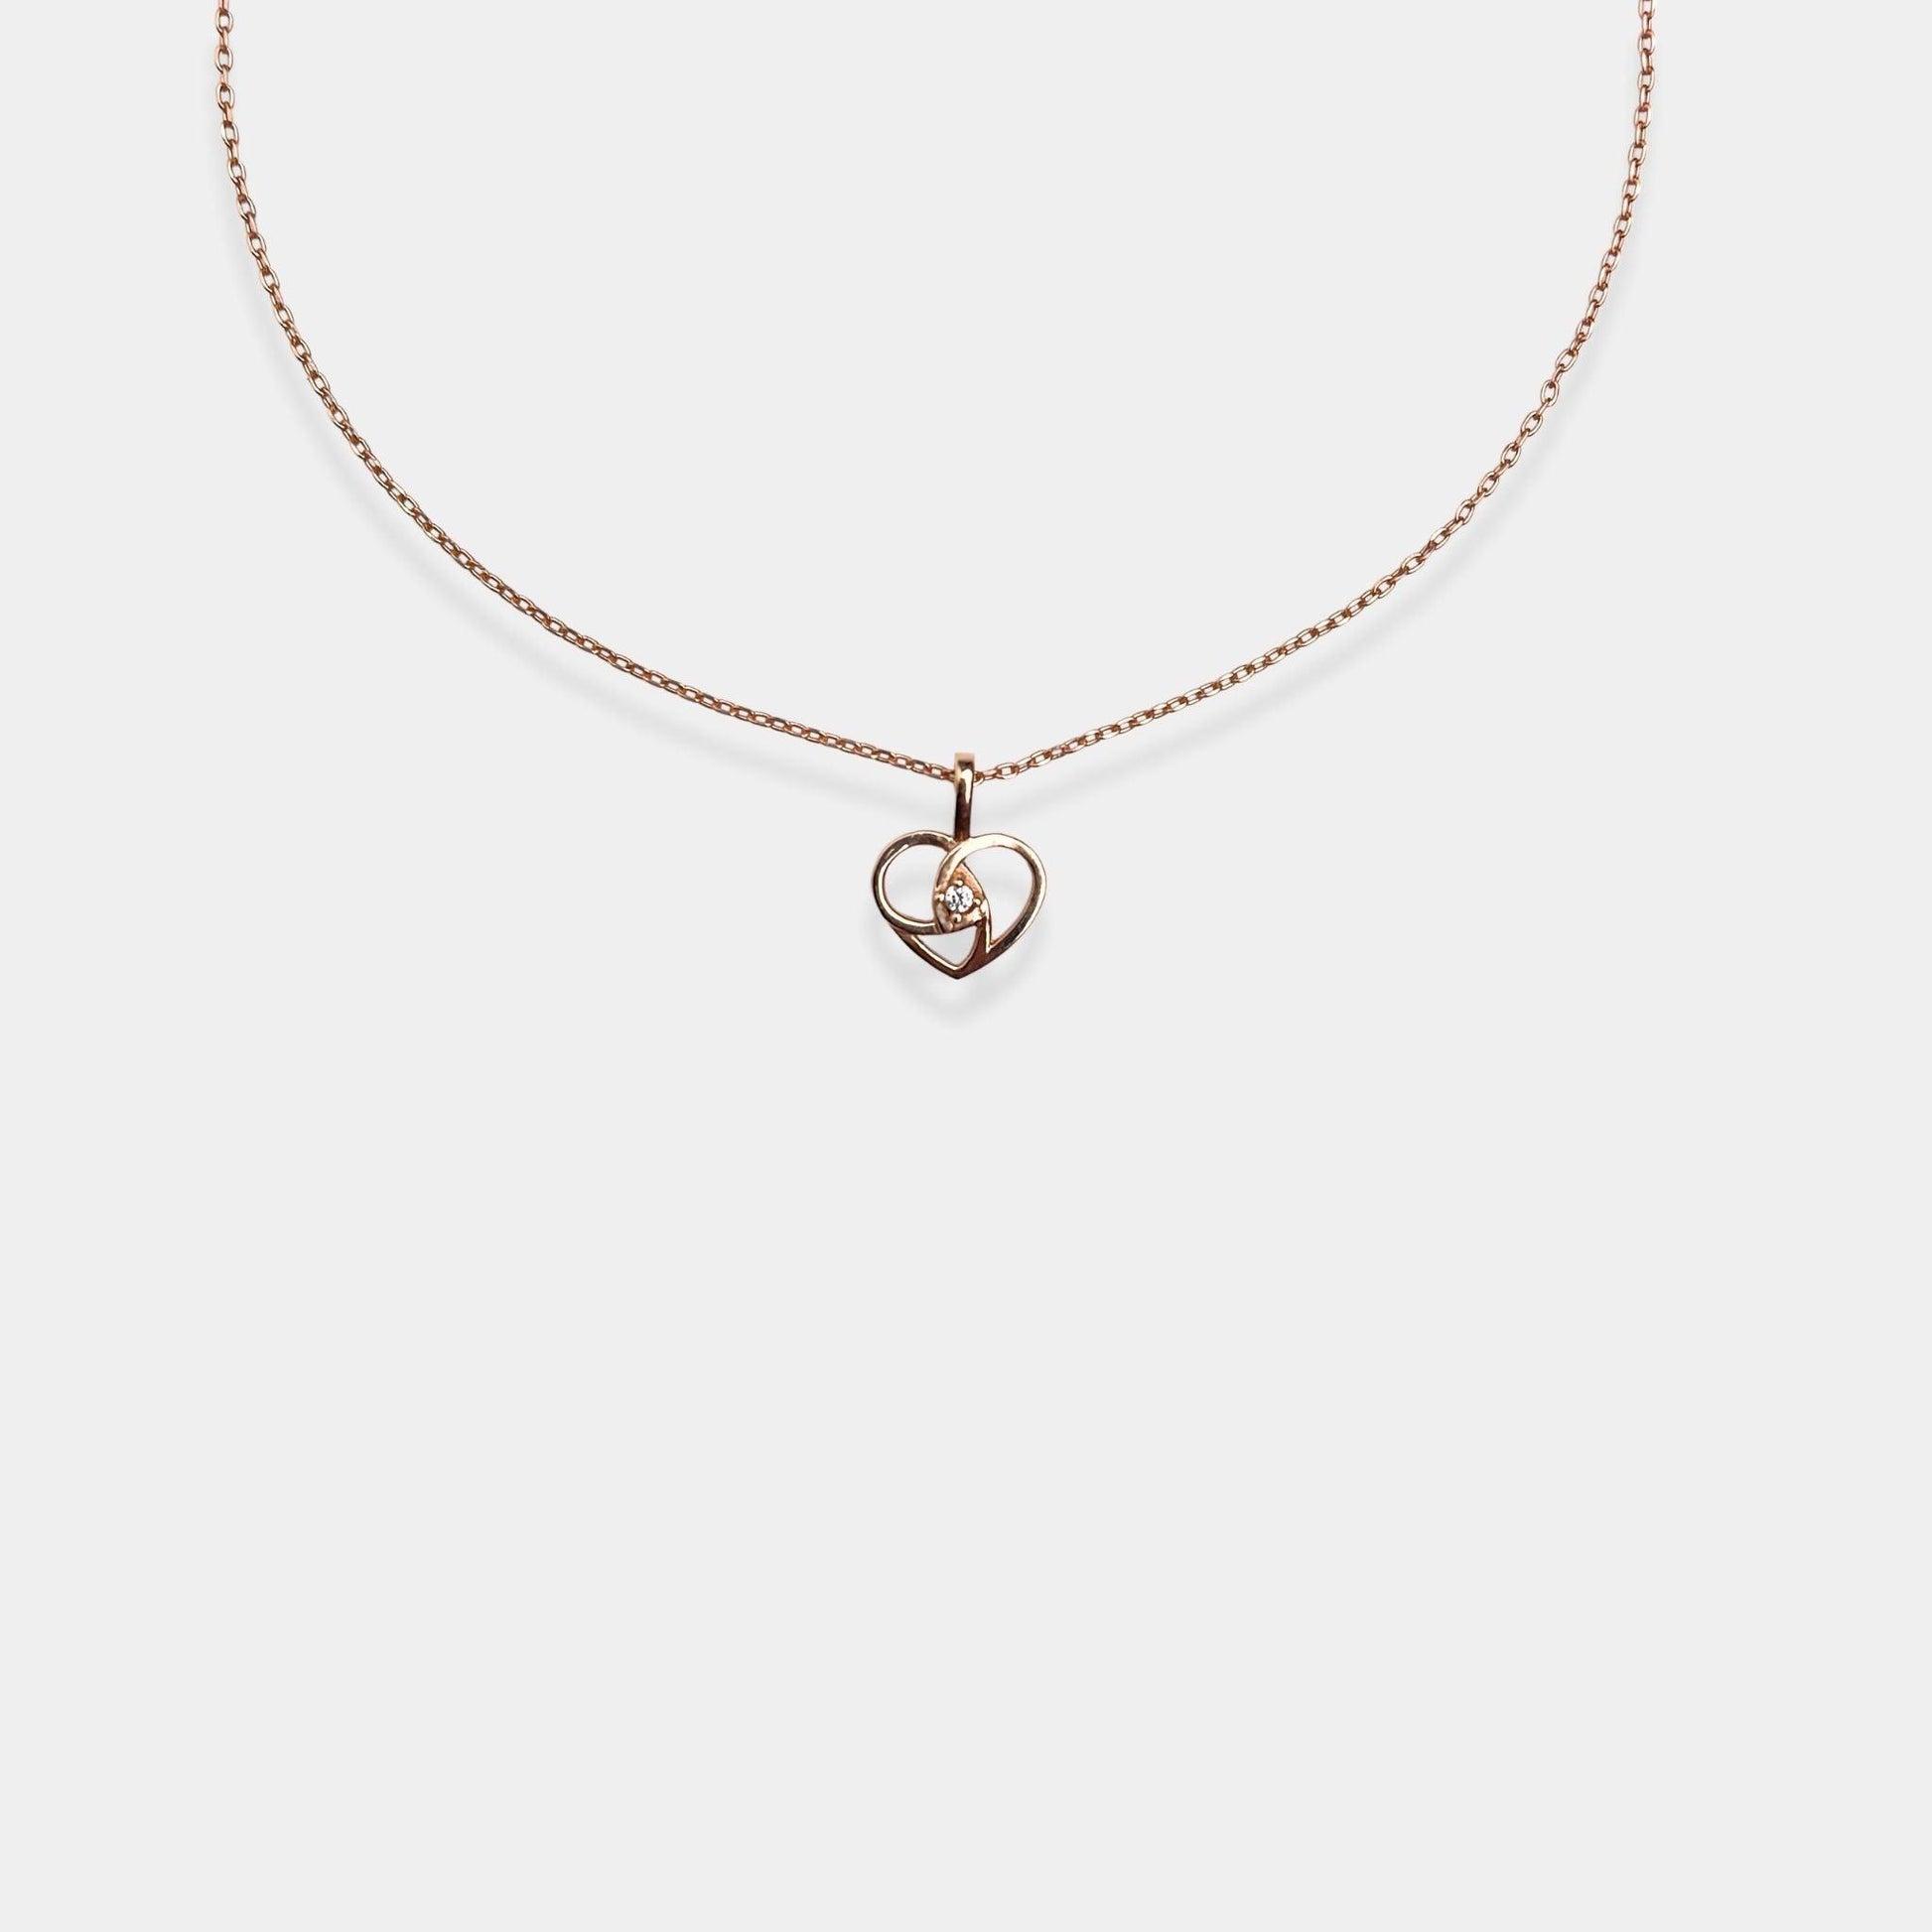 Fall in love with our stunning rose gold Love's Embrace Necklace, a timeless expression of affection